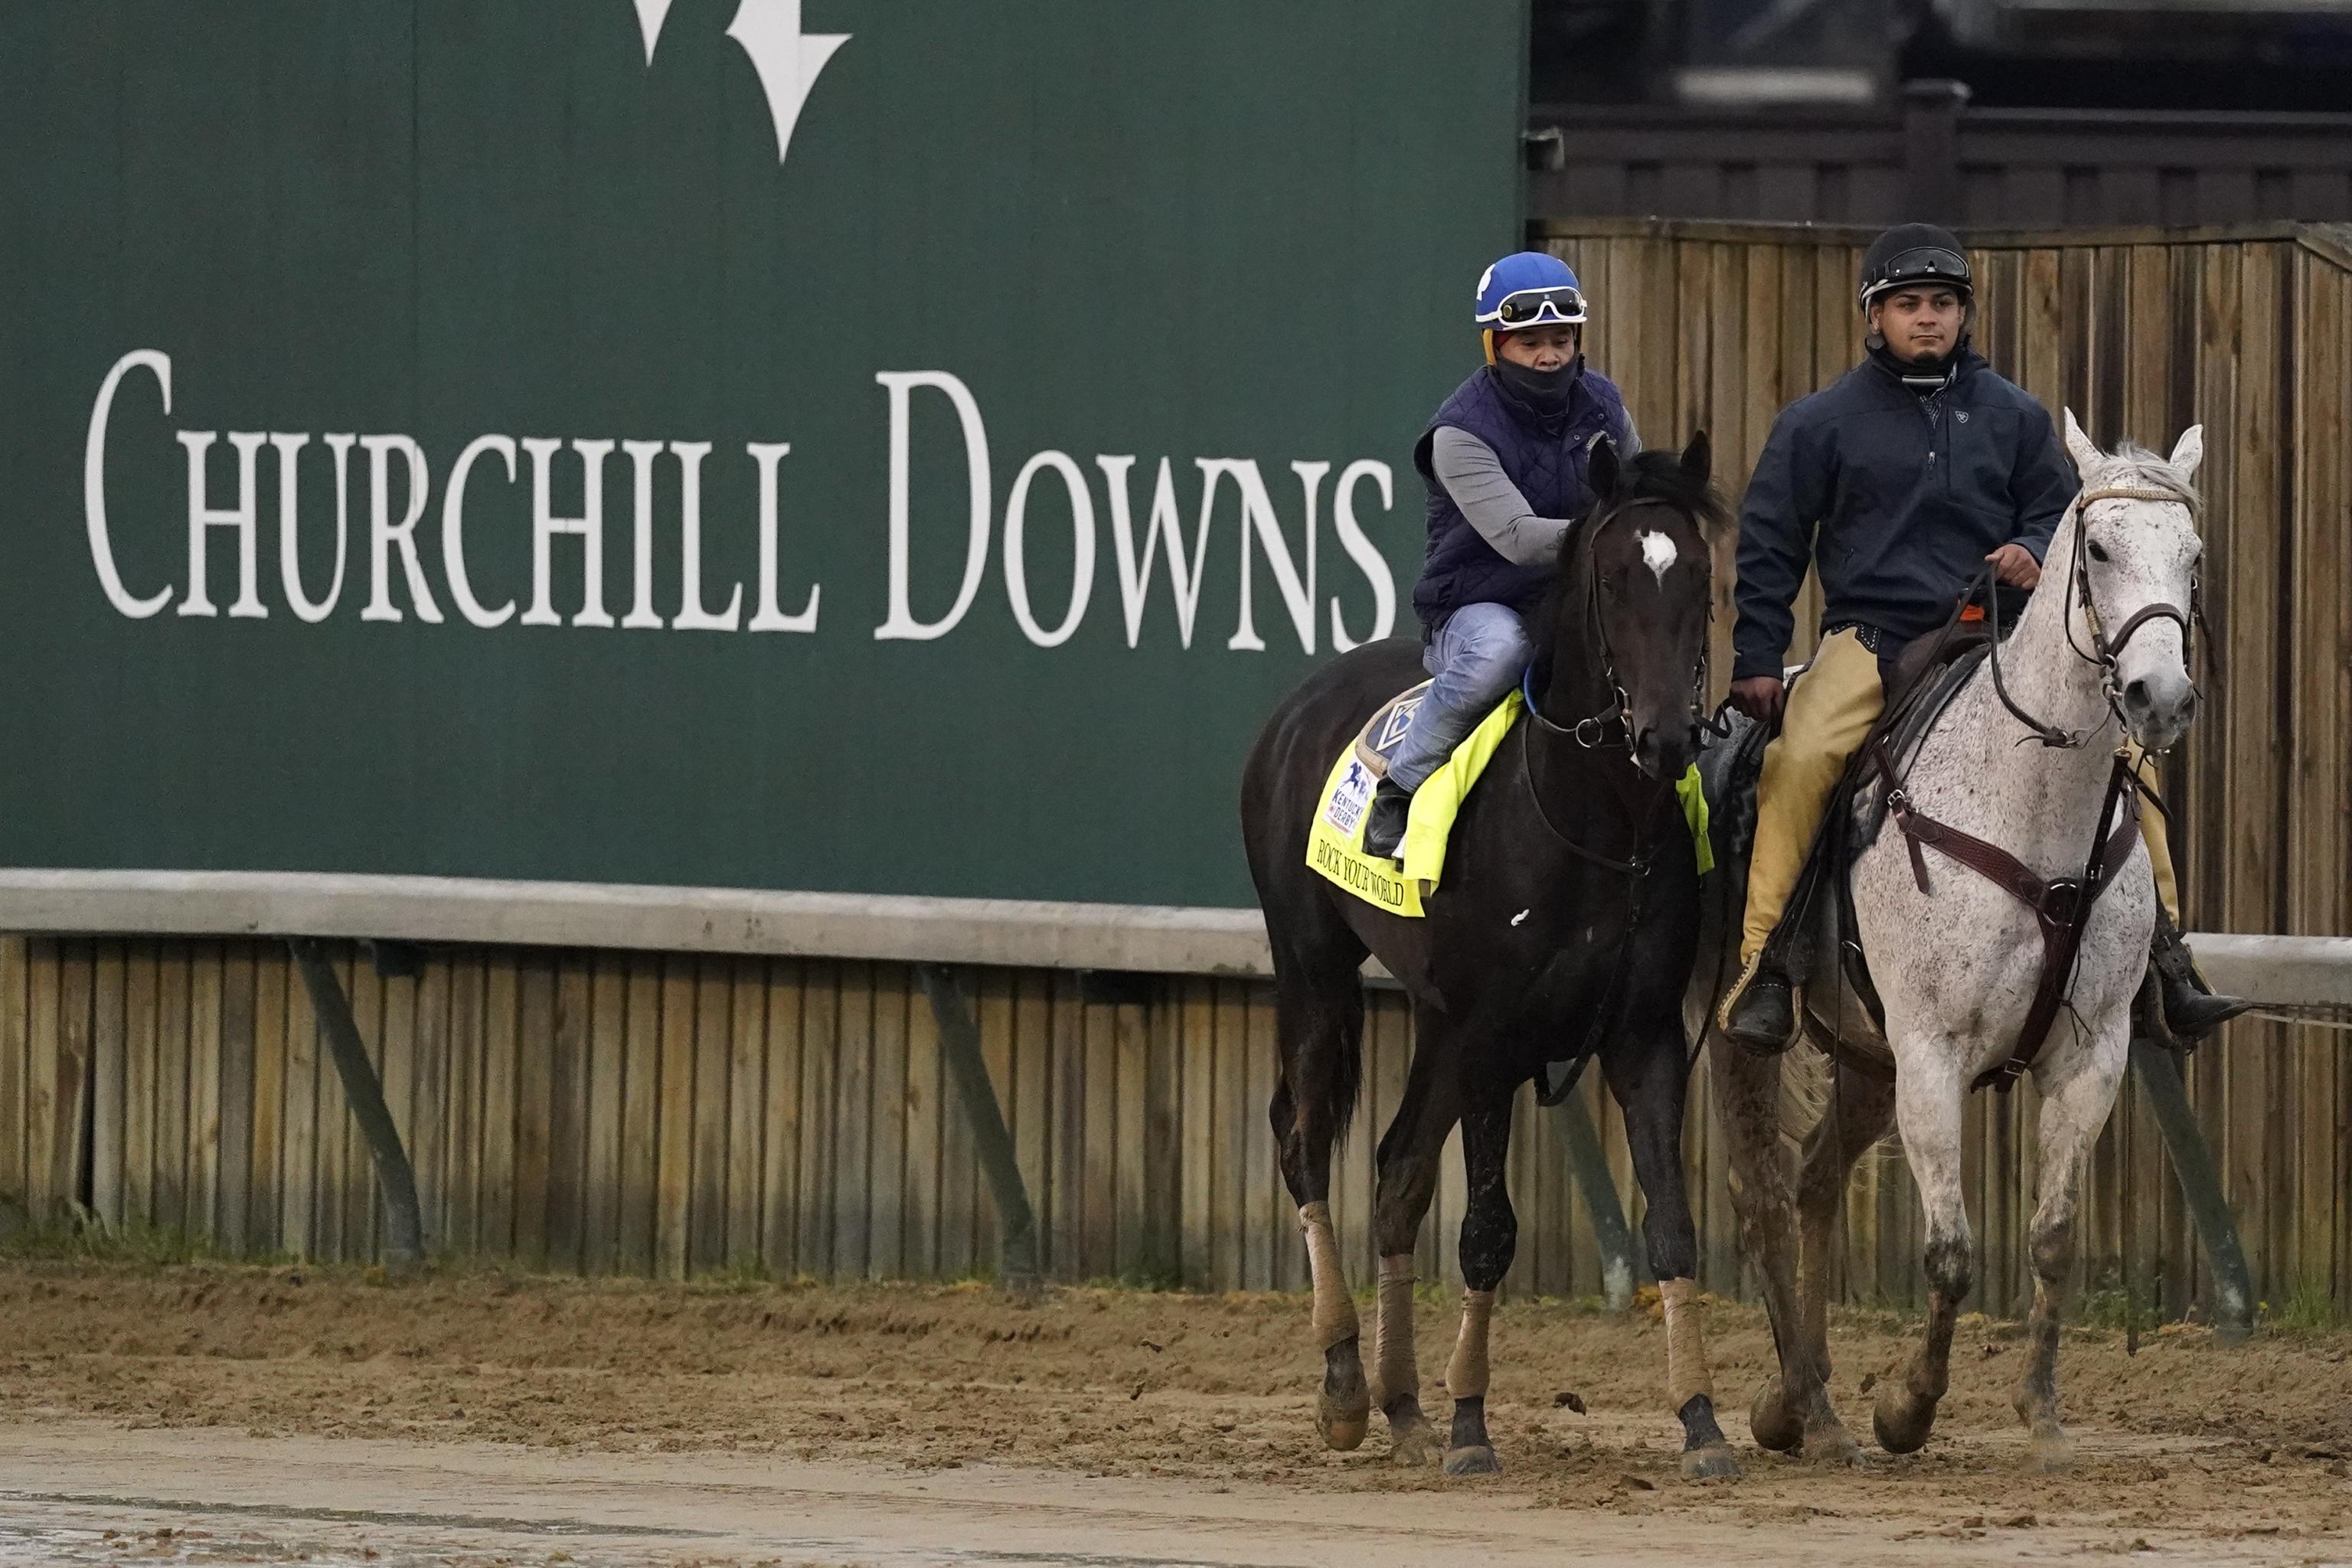 Kentucky Derby 2021 Lineup Full Race Guide for All Horses and Jockeys